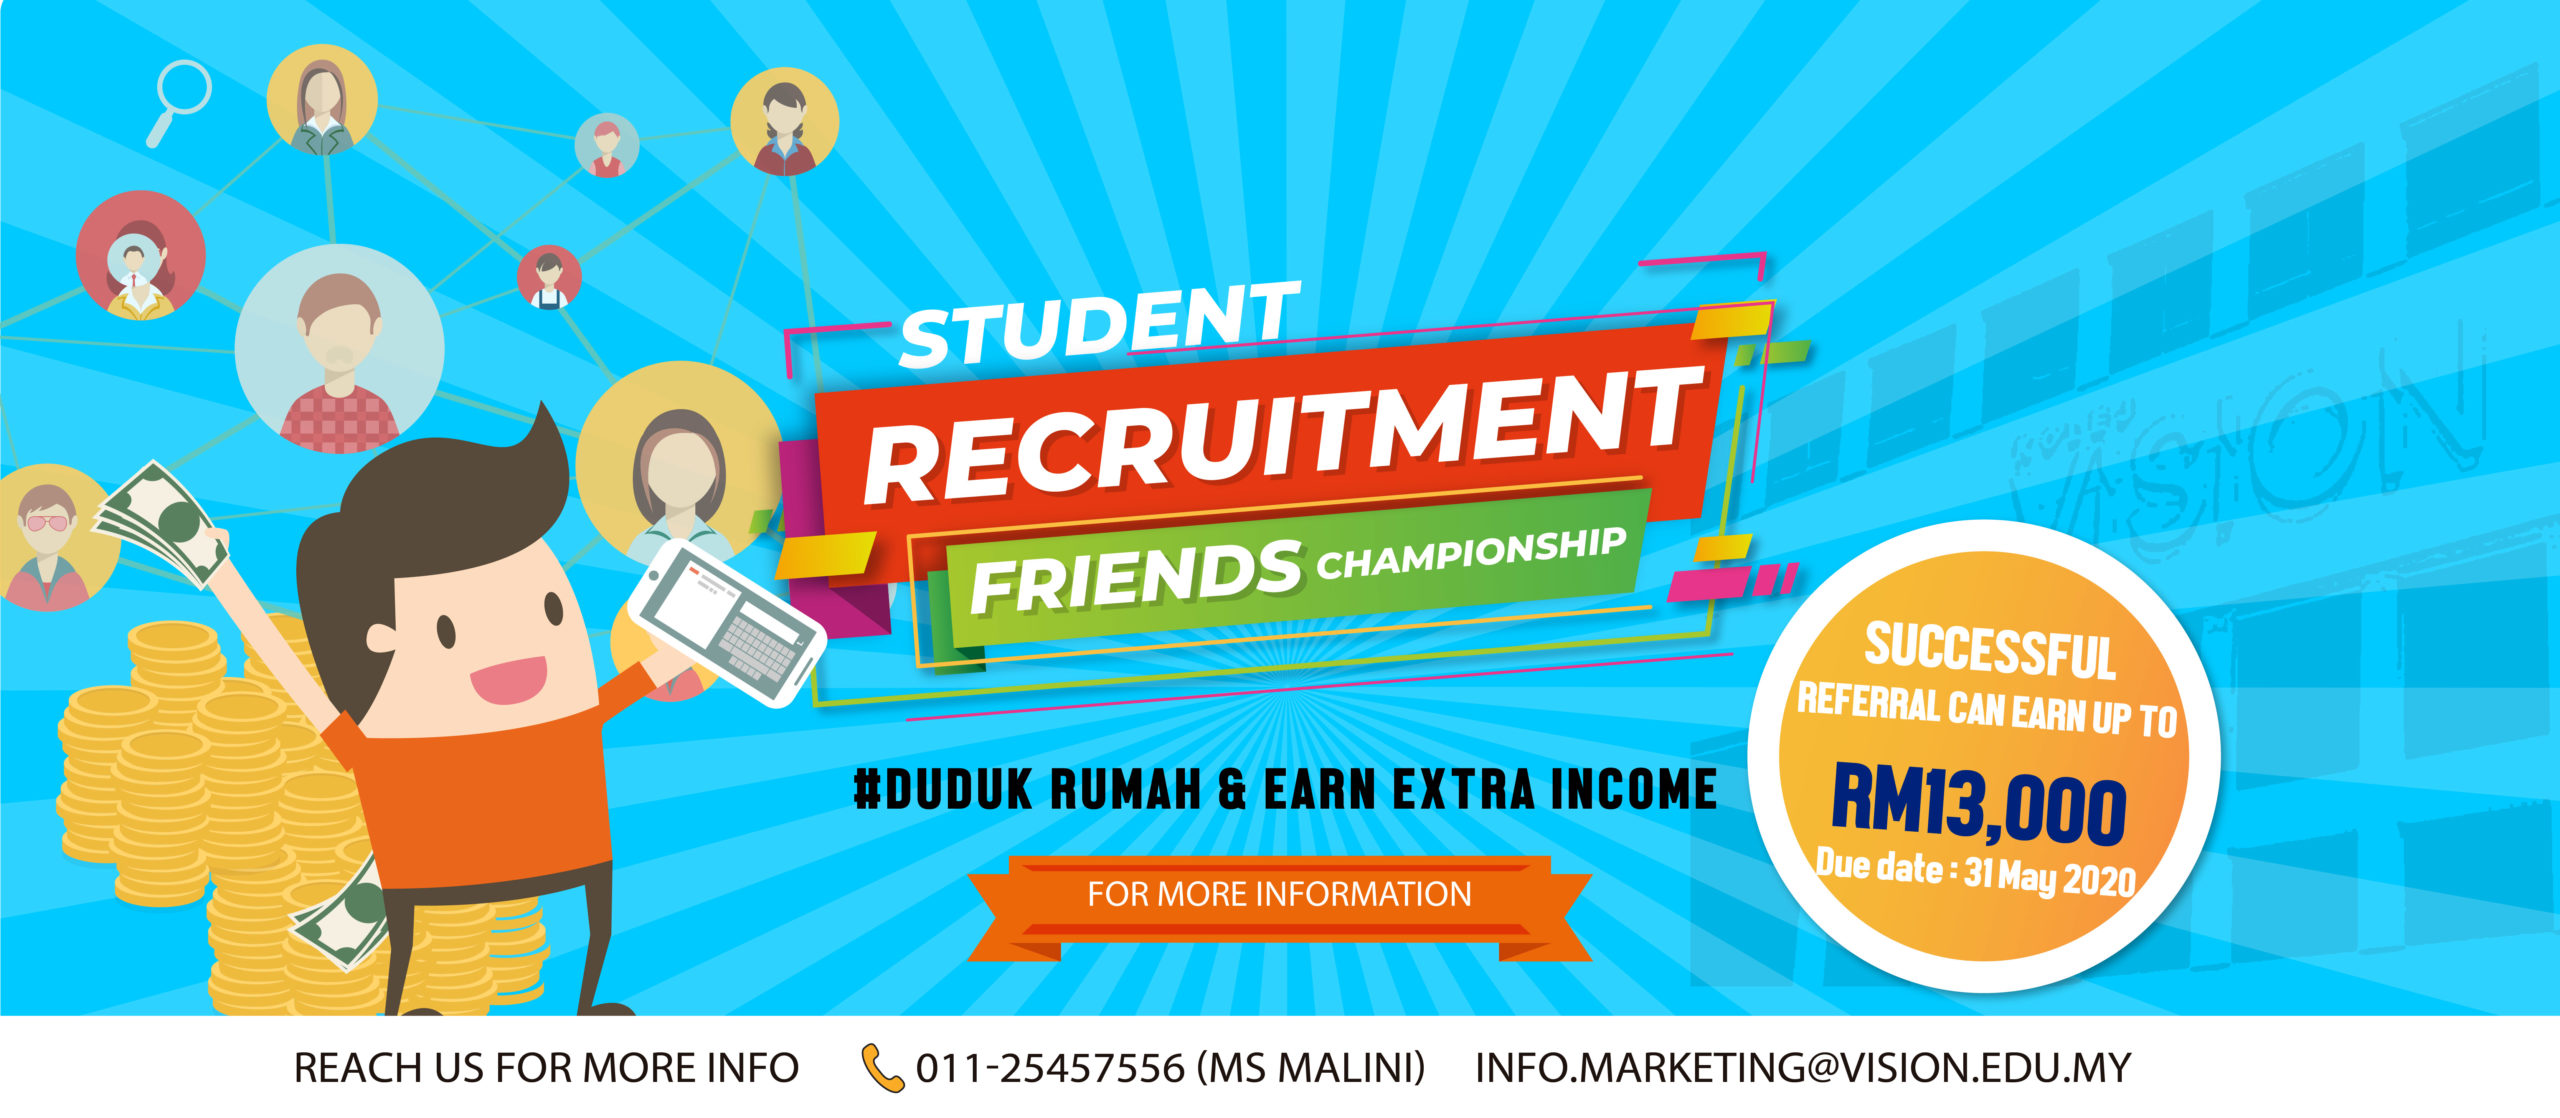 Vision College’s Students Recruitment of Friends Championship